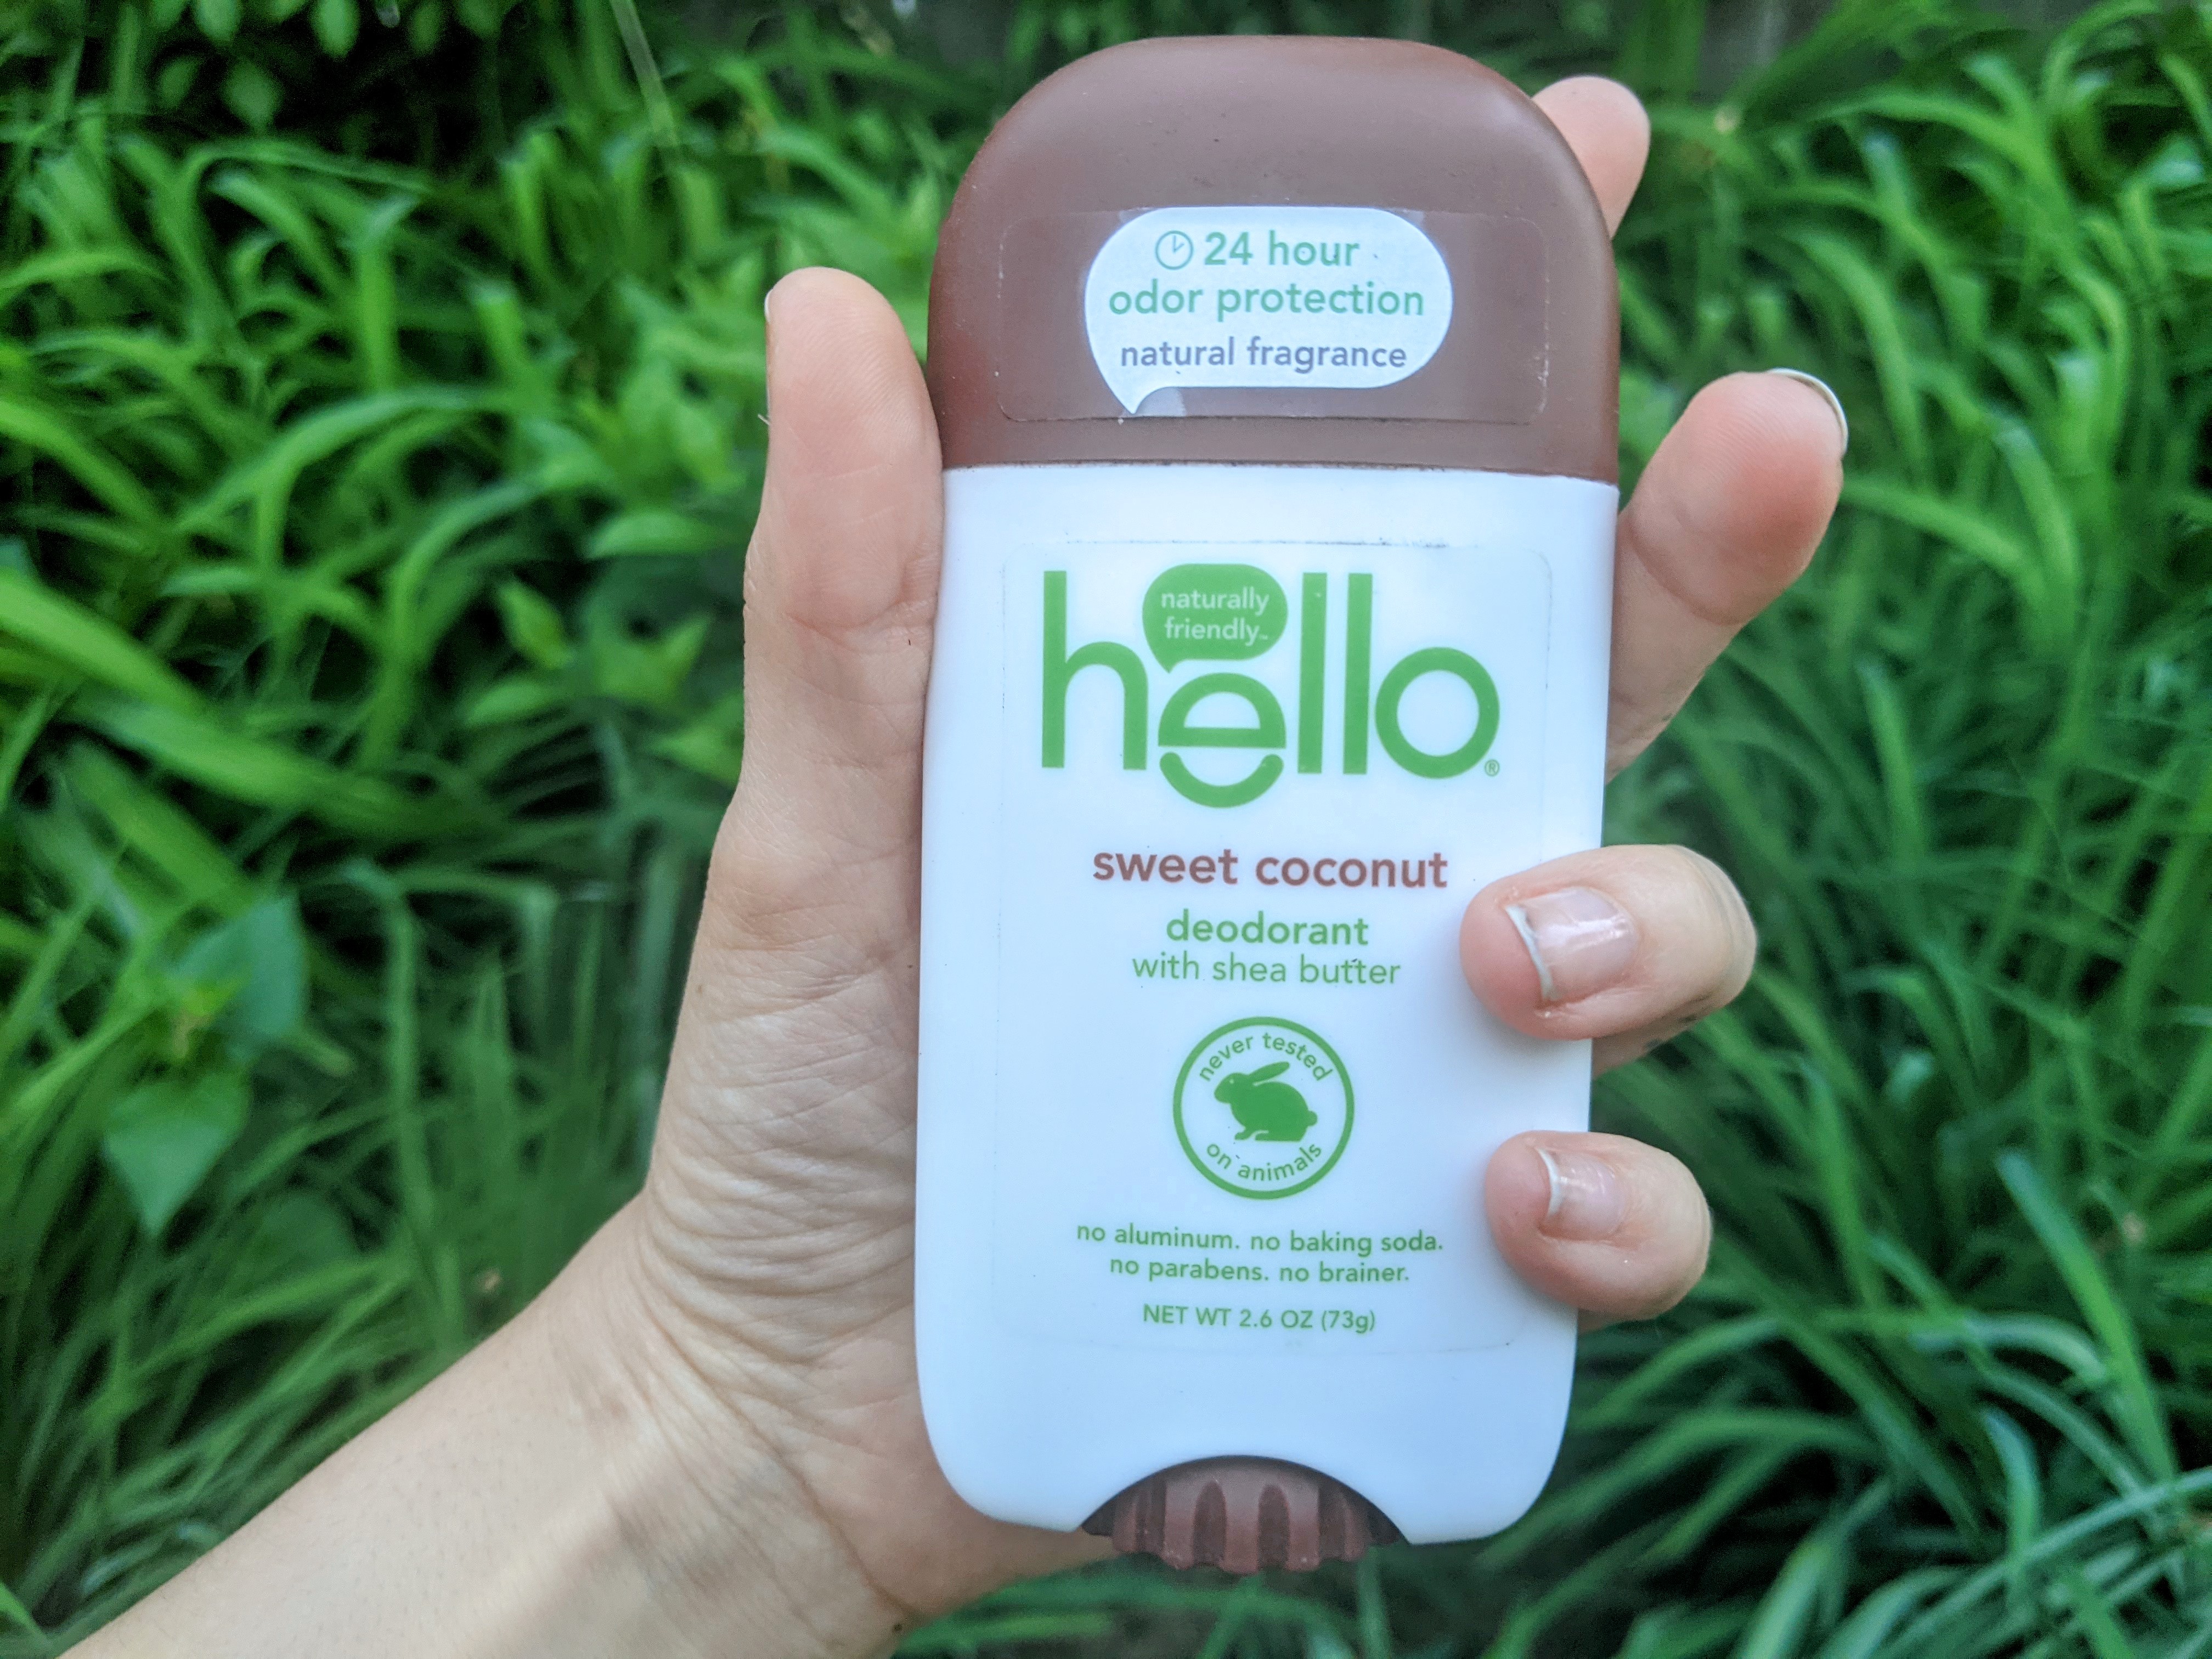 Photo of hand holding up Hello Sweet Coconut deodorant against foliage